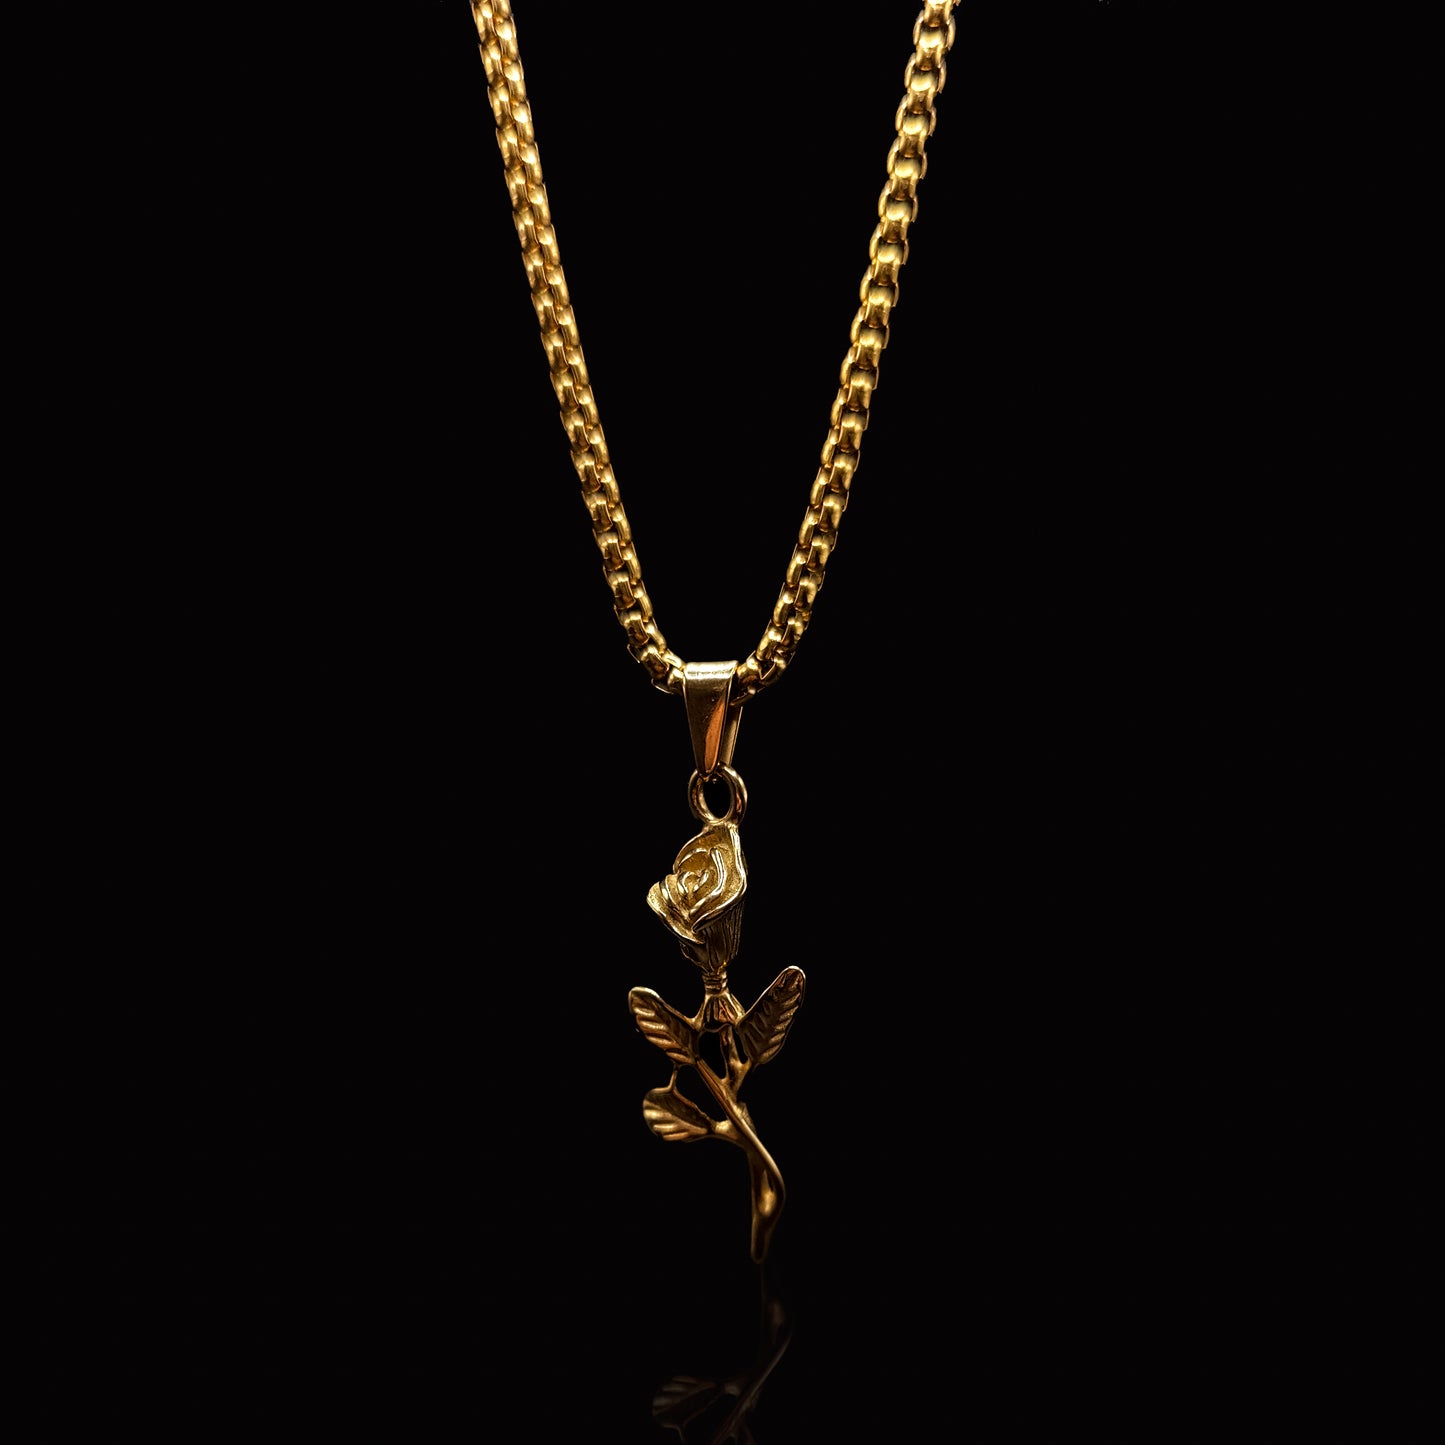 Gold Single Rose Pendant & Rolo Chain 3mm-22inch